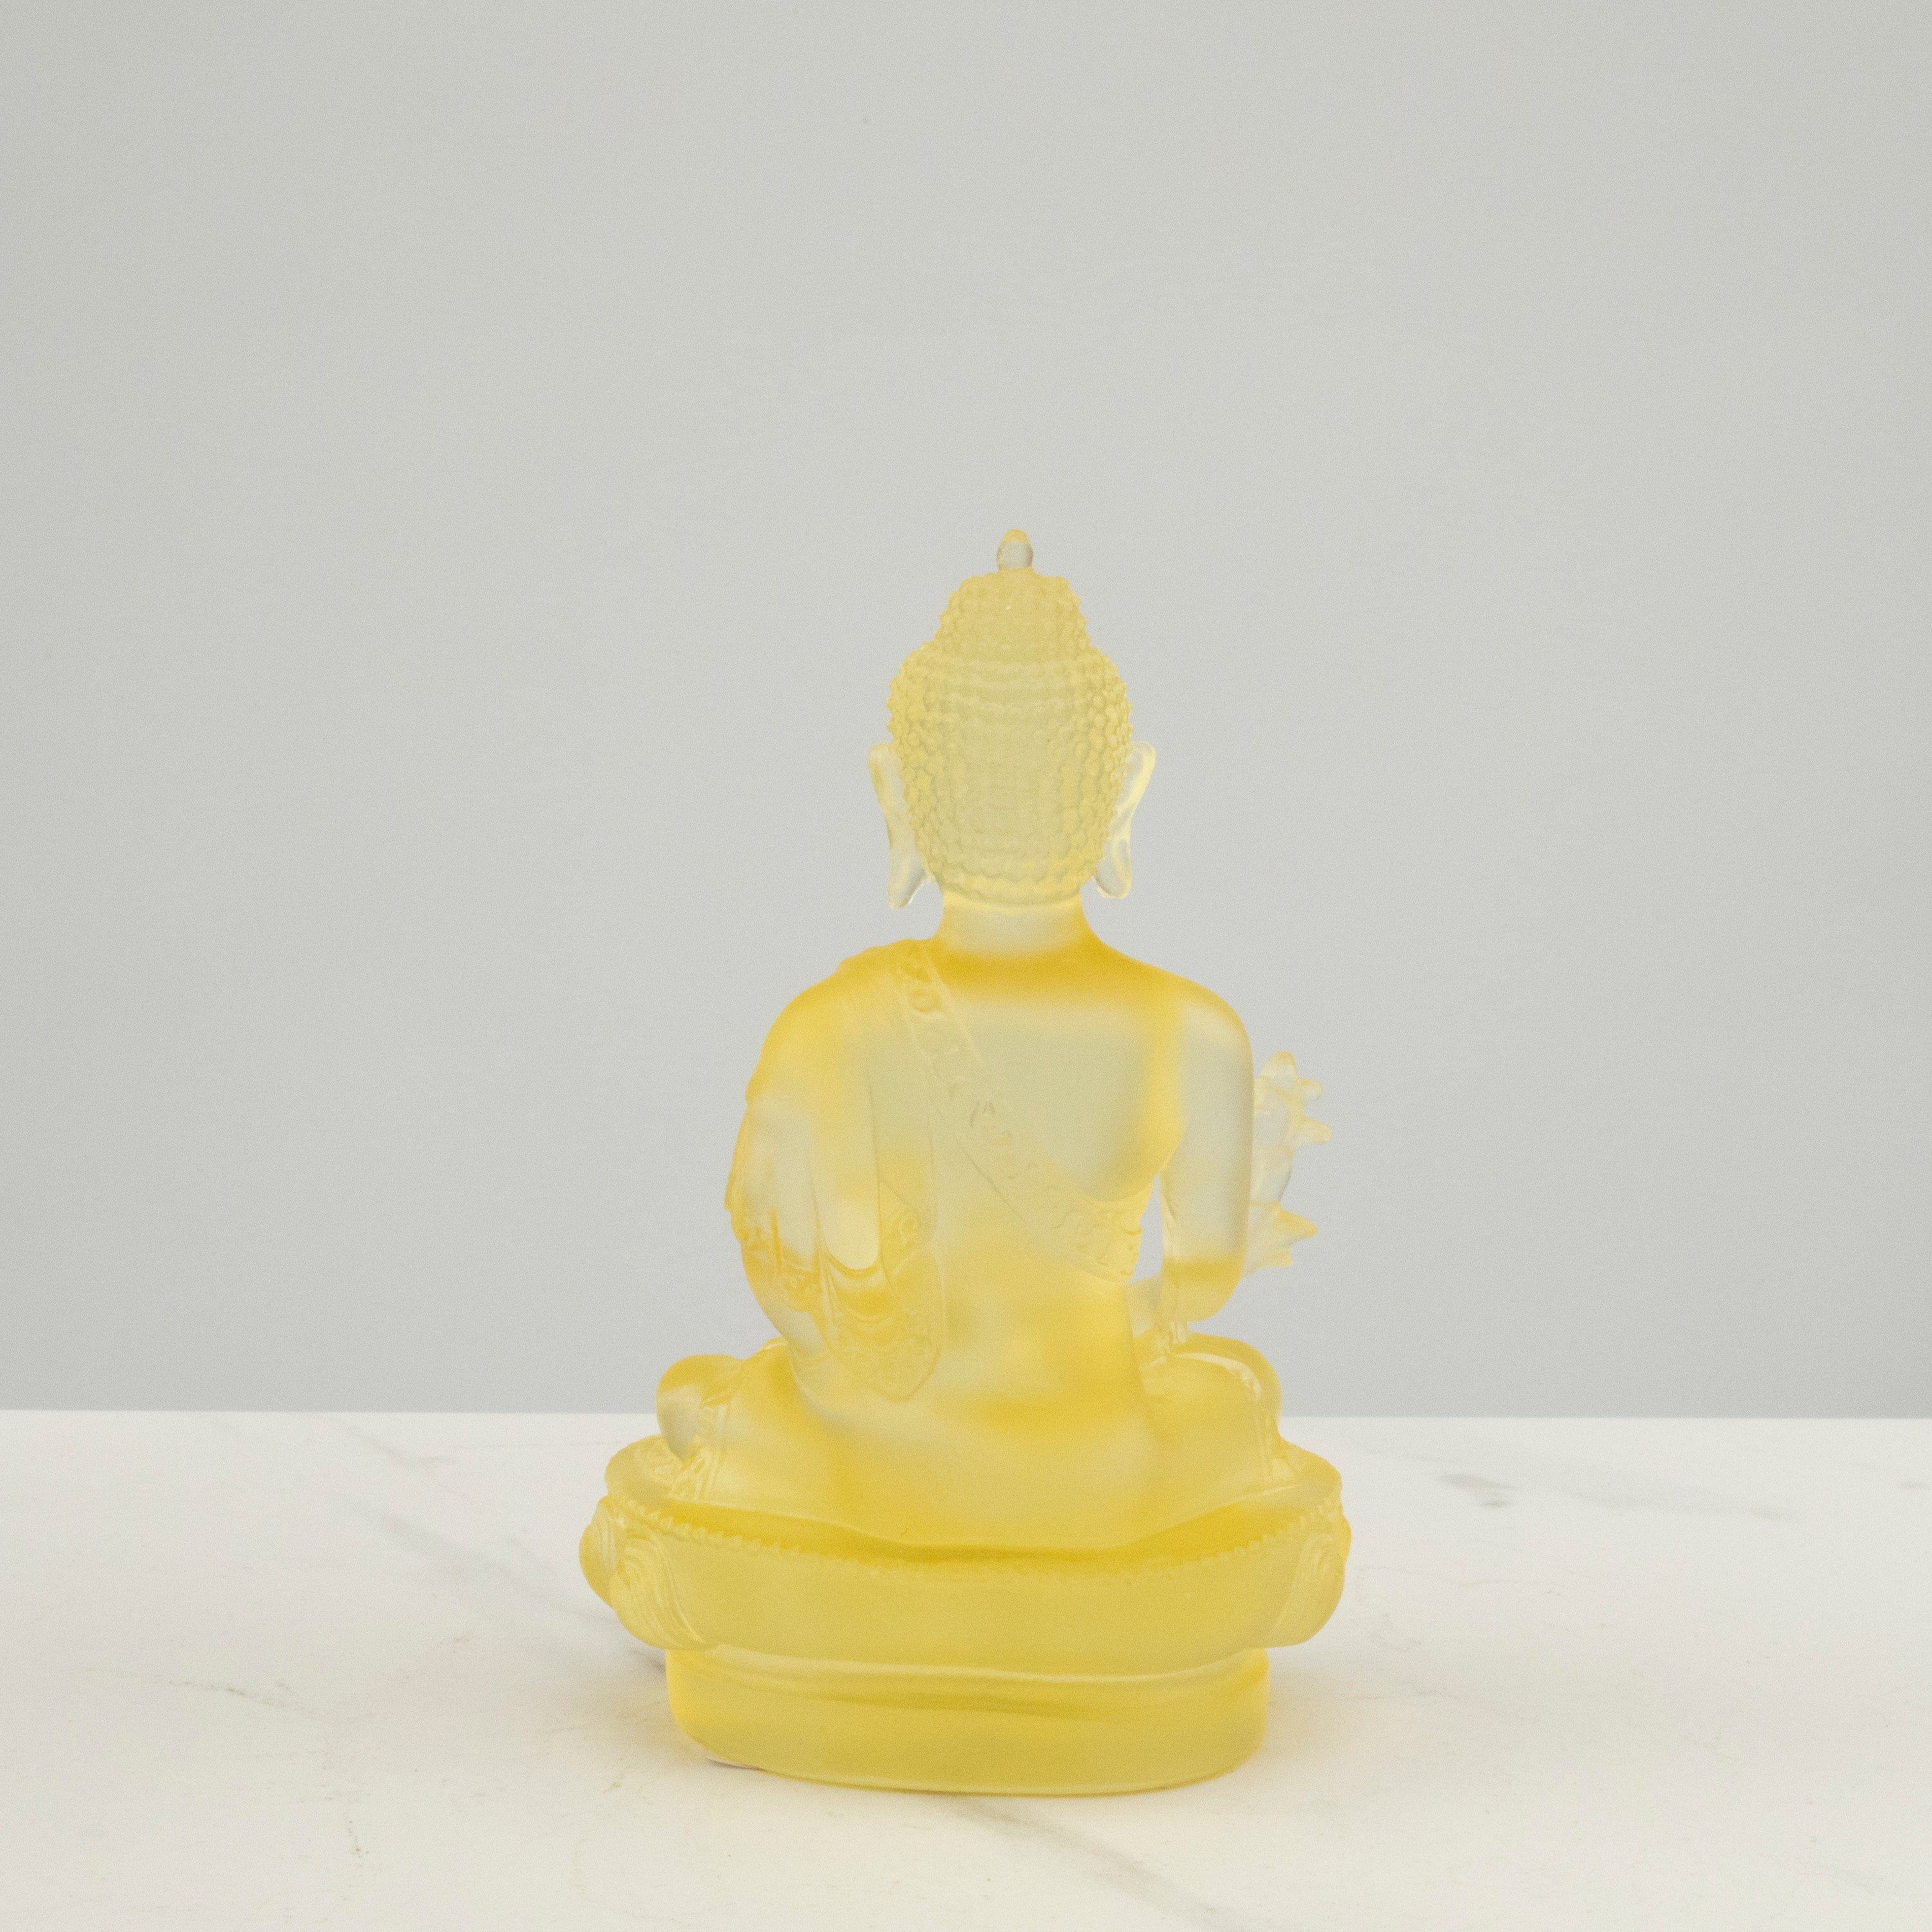 Kalifano Crystal Carving Divine Yellow Guan Yin Crystal Carving - A Symbol of Compassion and Protection CRB110-YL